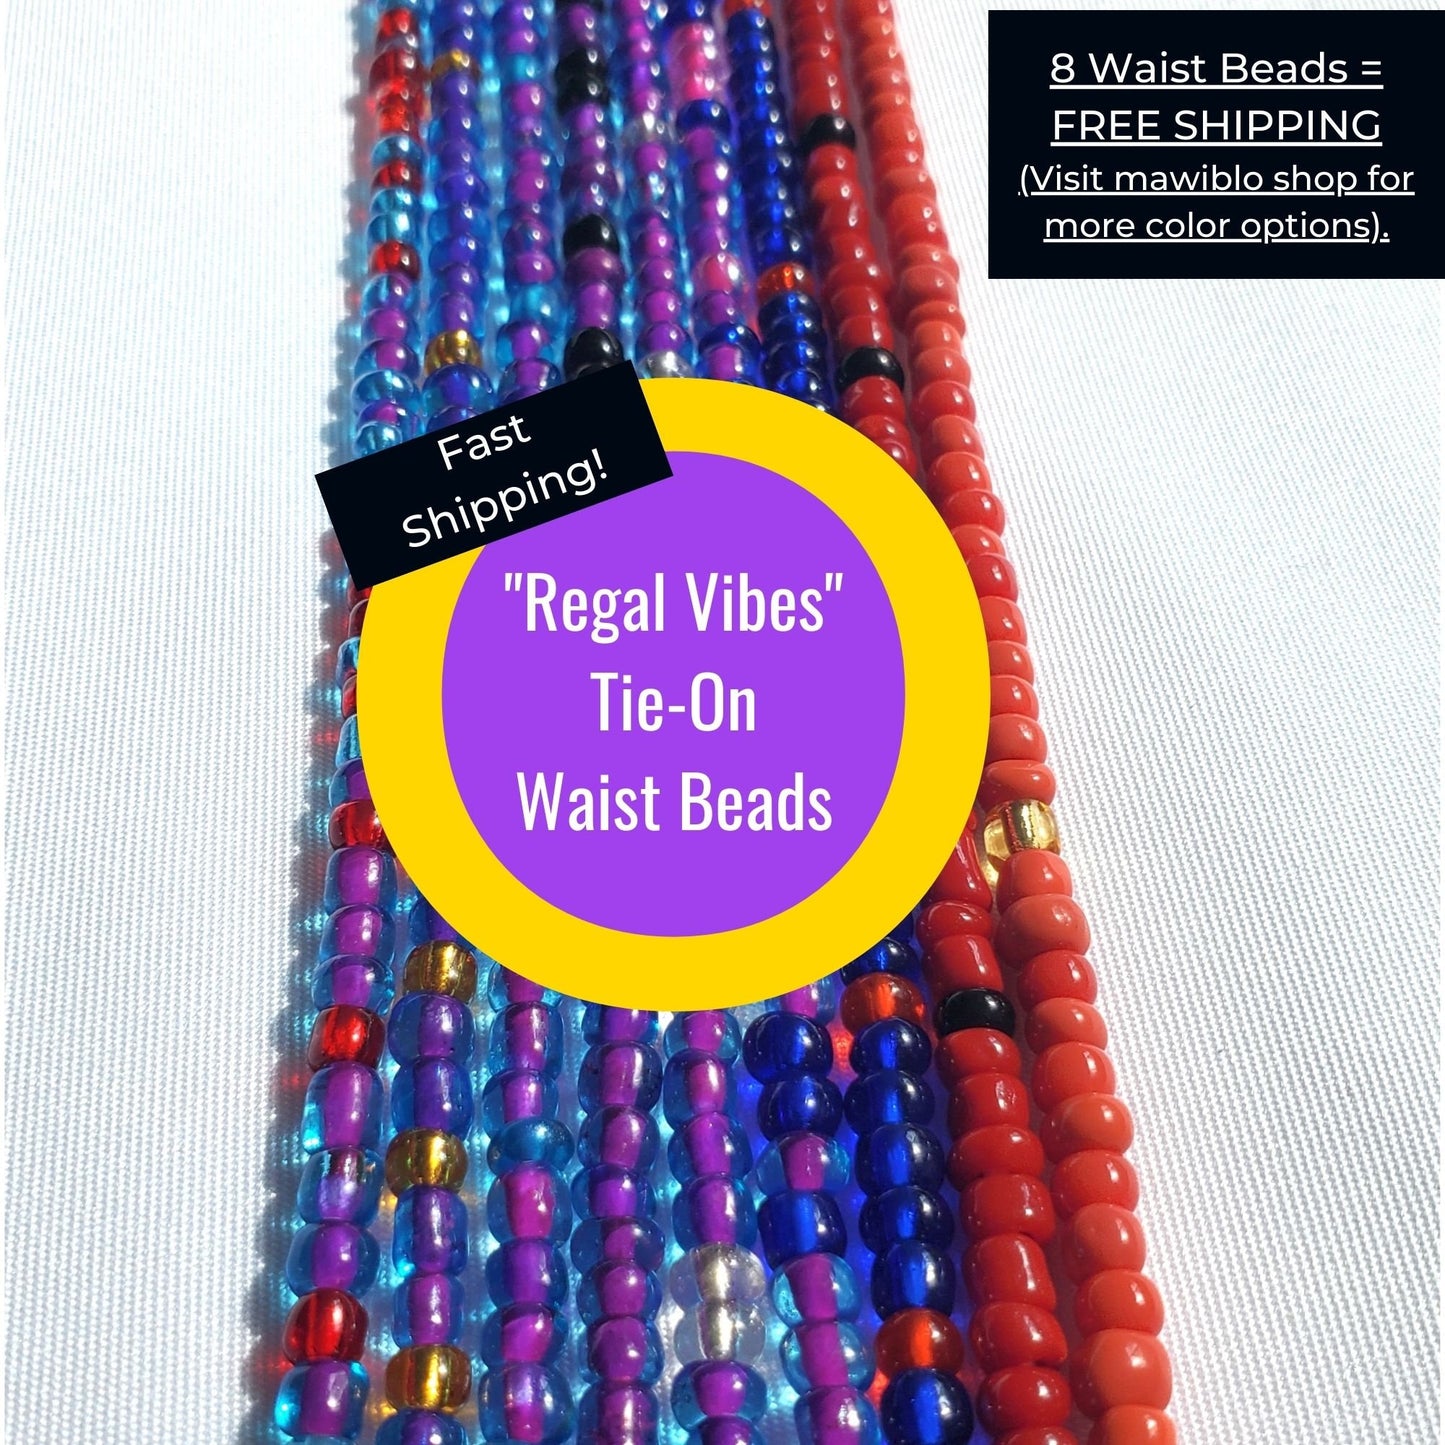 Purple and Red "Regal Vibes" Tie-On African Waist Beads